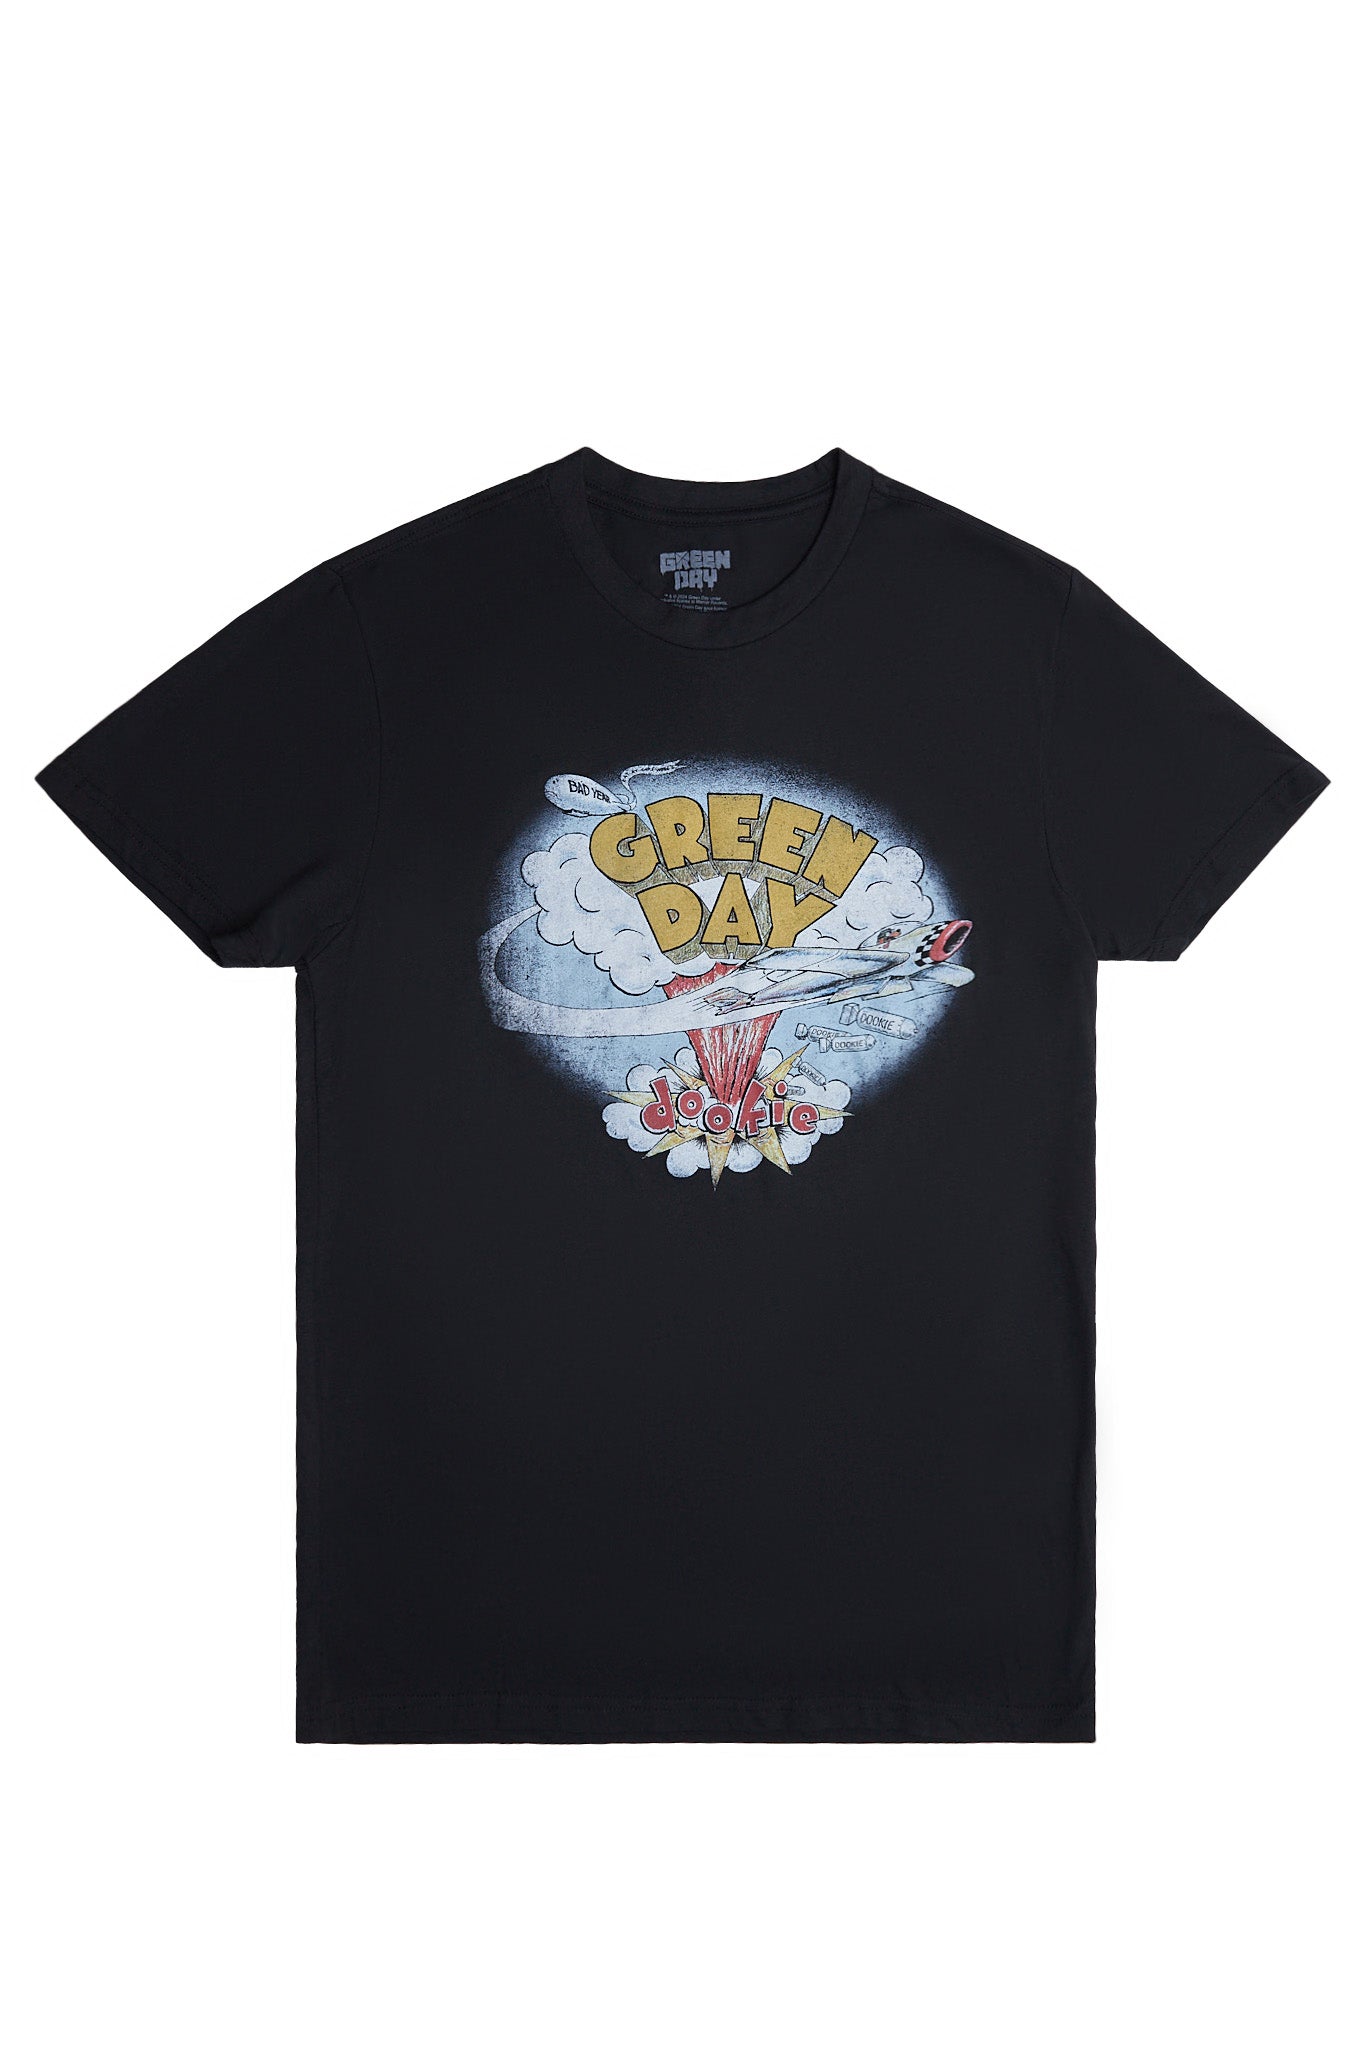 Green Day Dookie Graphic Tee